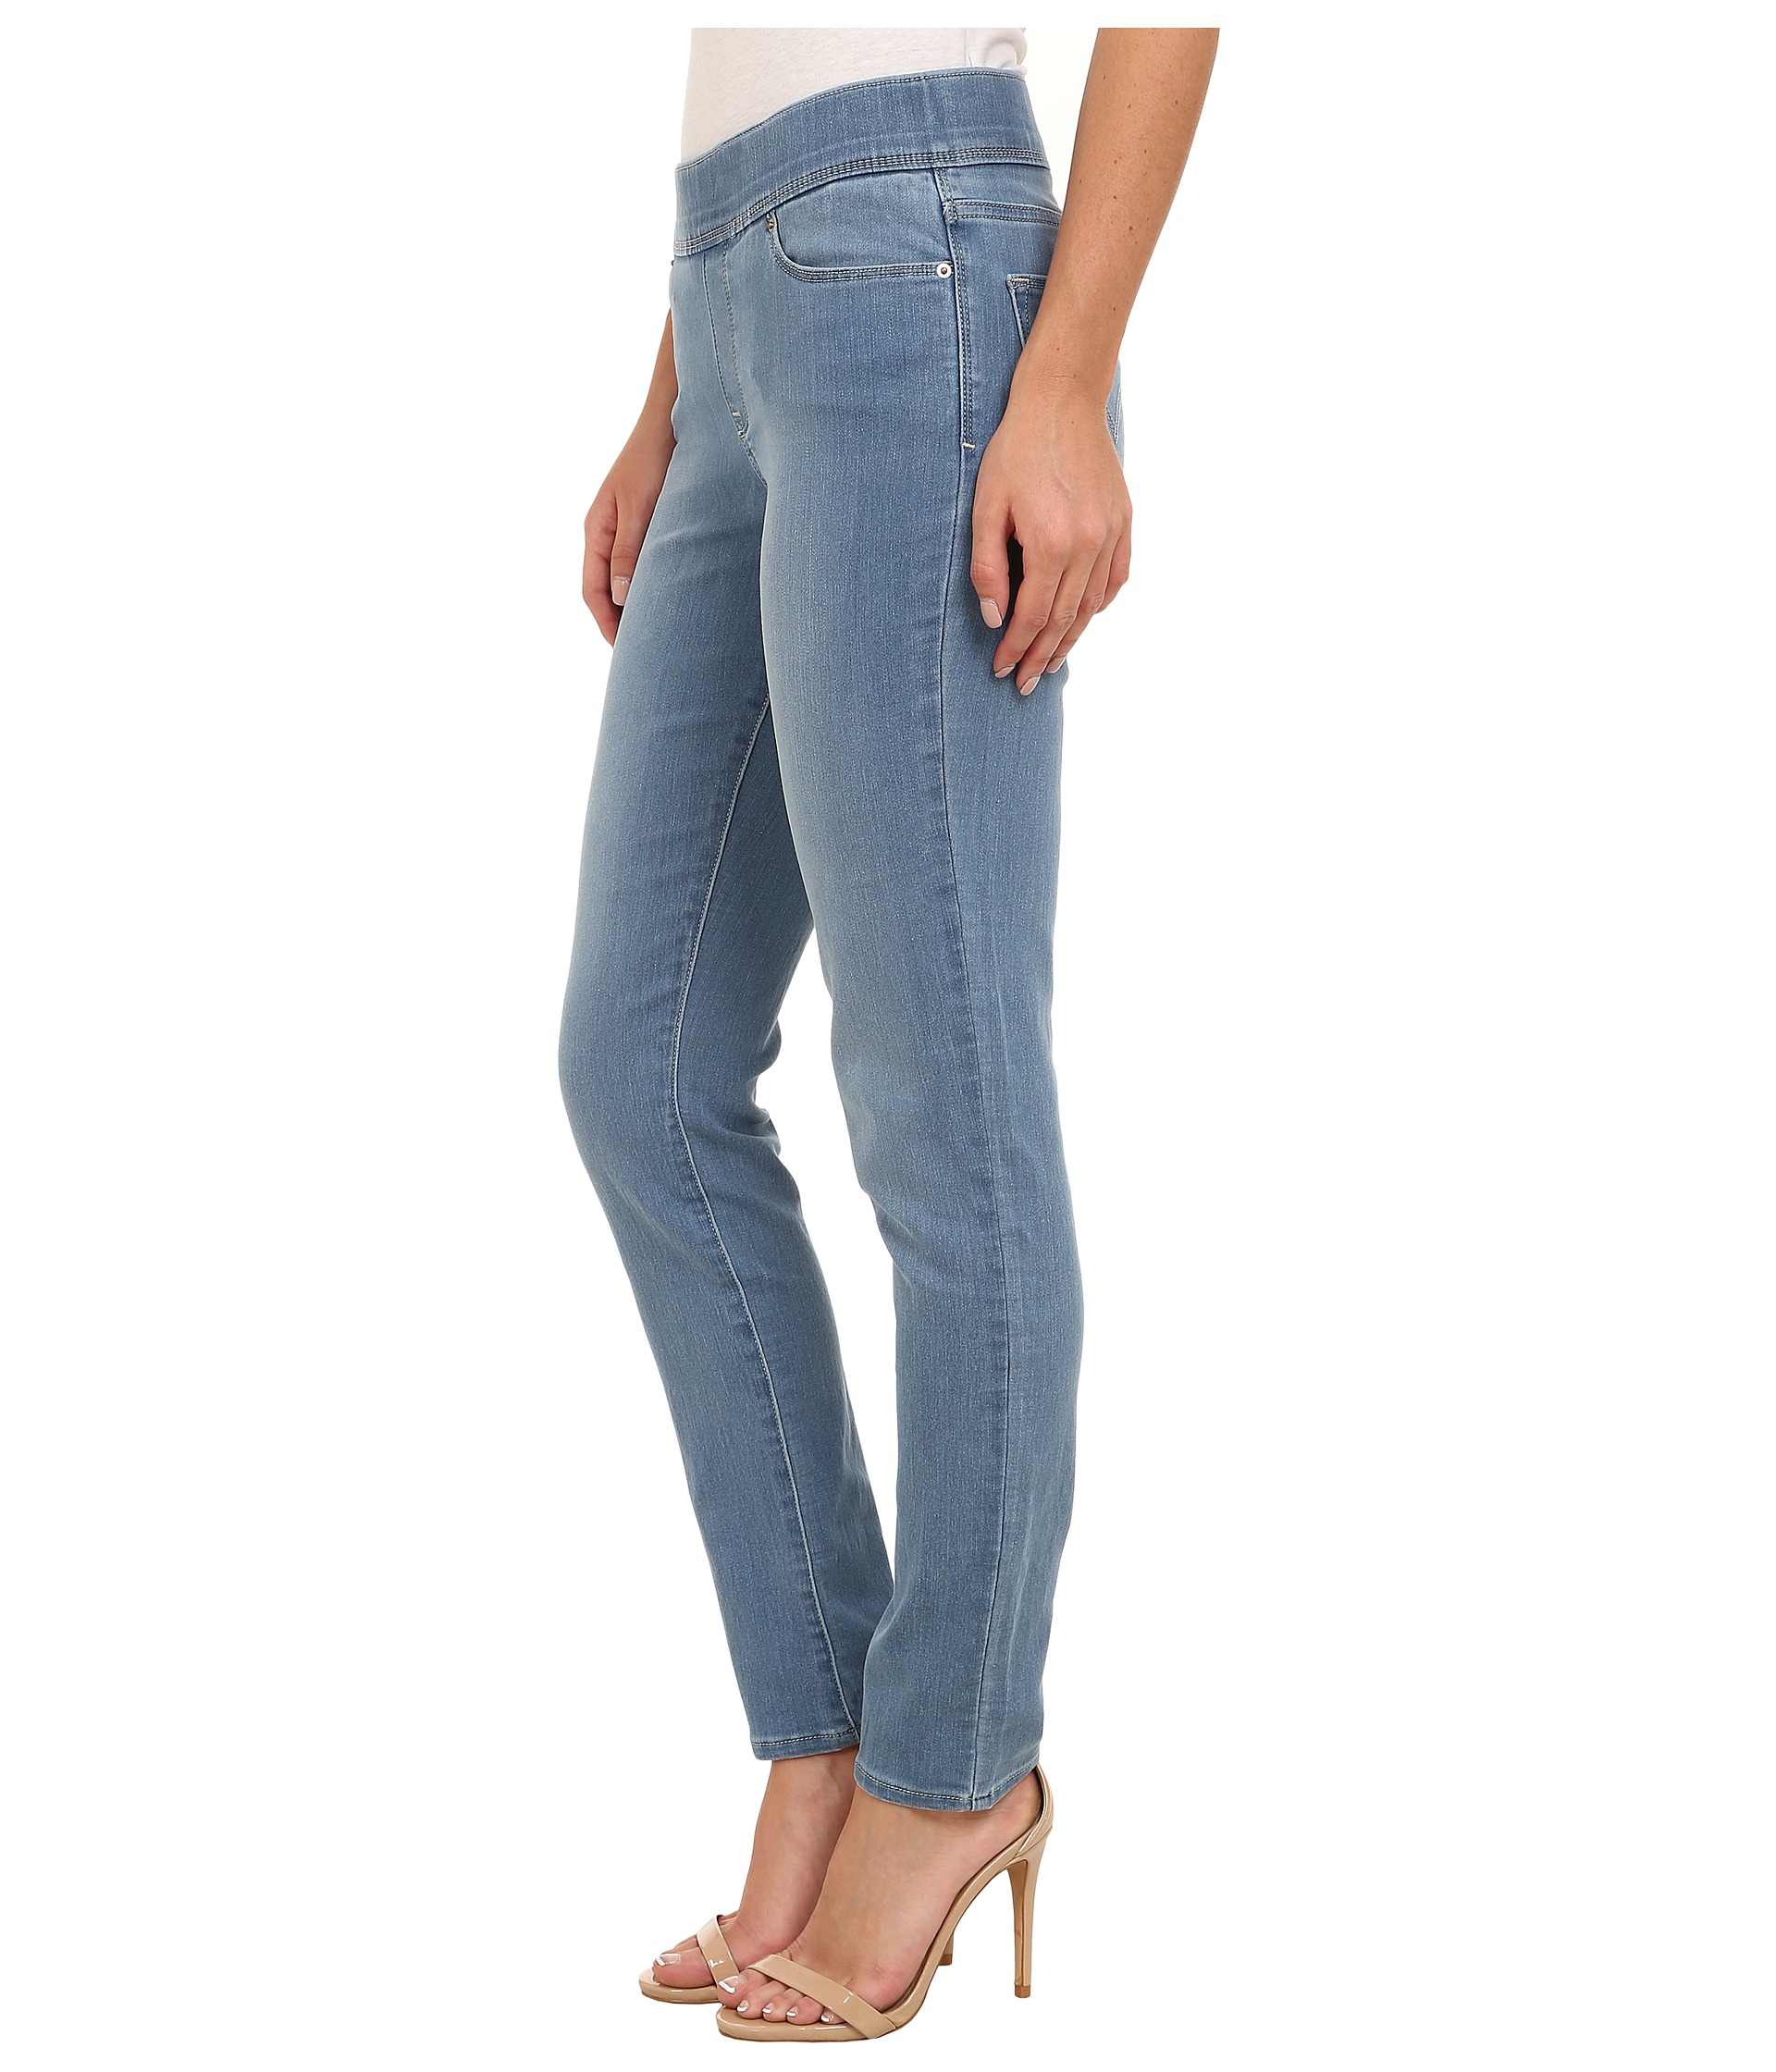 Levi's® Womens Perfectly Slimming Pull On Skinny at Zappos.com